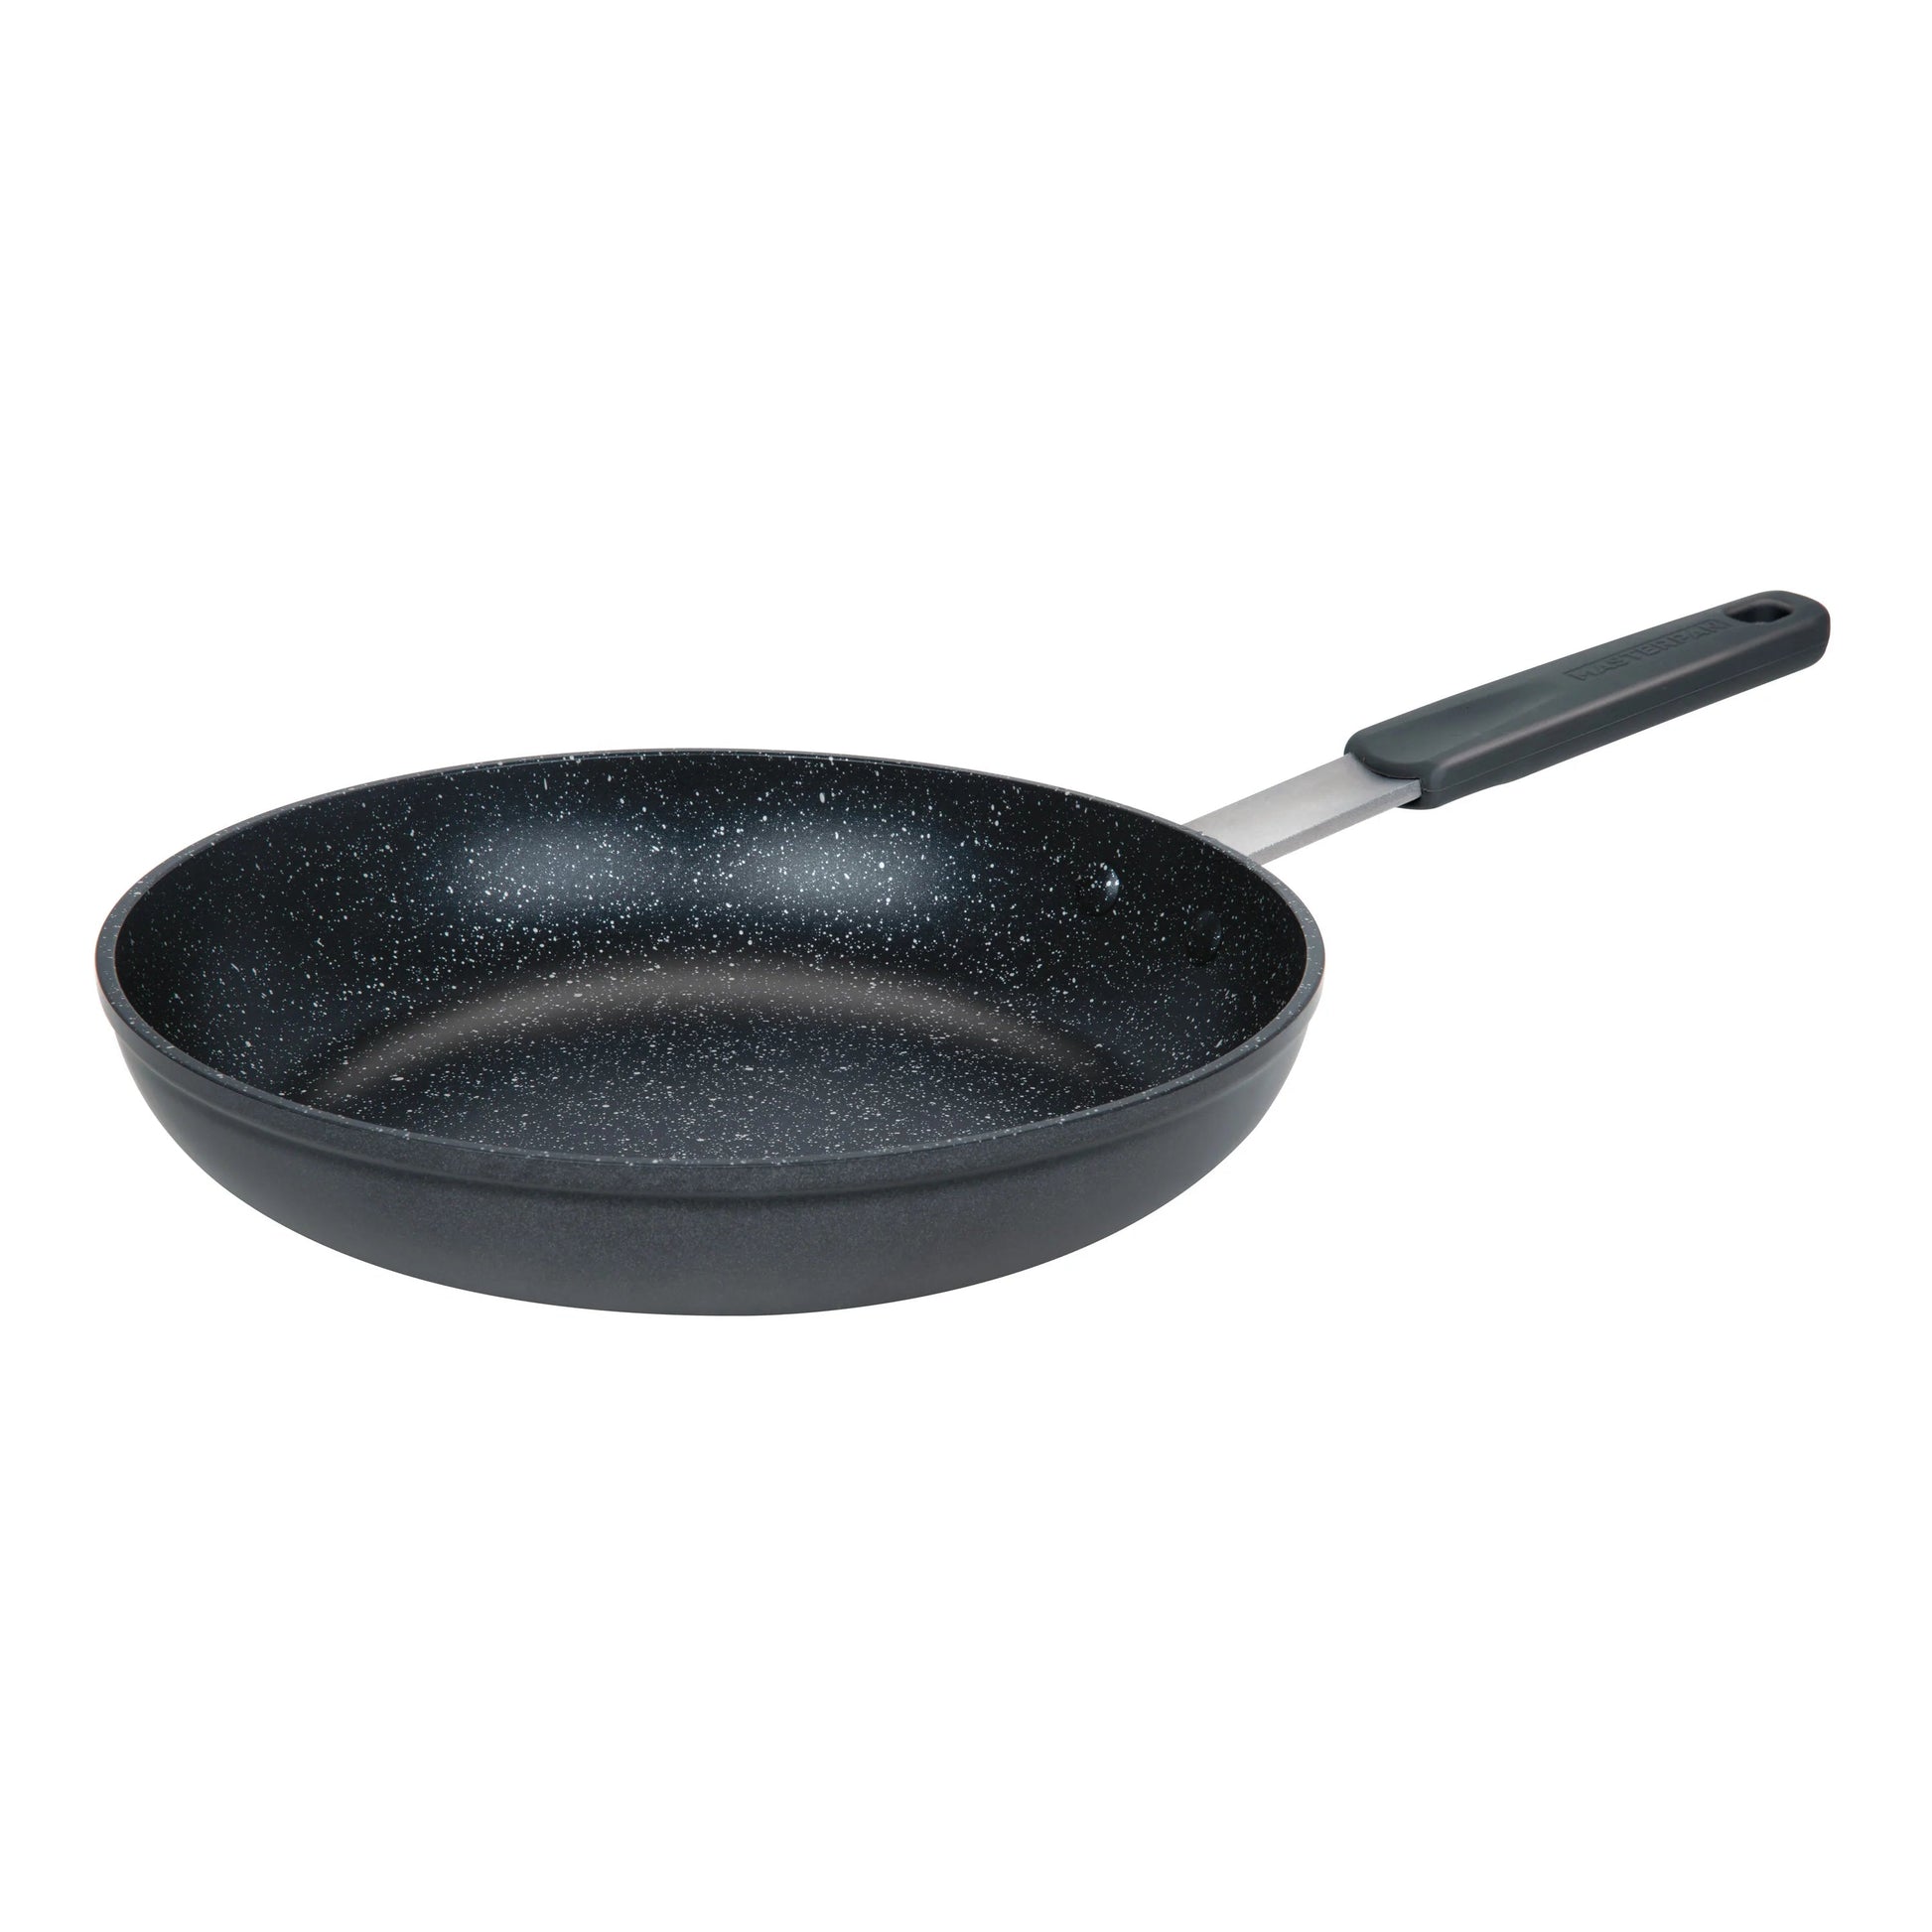 https://kitchenoasis.com/cdn/shop/files/MASTERPAN-Chefs-Series-11-4-Layer-Ceramic-Re-Enforced-Non-Stick-Cast-Aluminum-Frying-Pan-and-Skillet-With-Riveted-Stainless-Steel-Handle-and-Removable-Silicone-Handle-Cover-2.webp?v=1685839952&width=1946